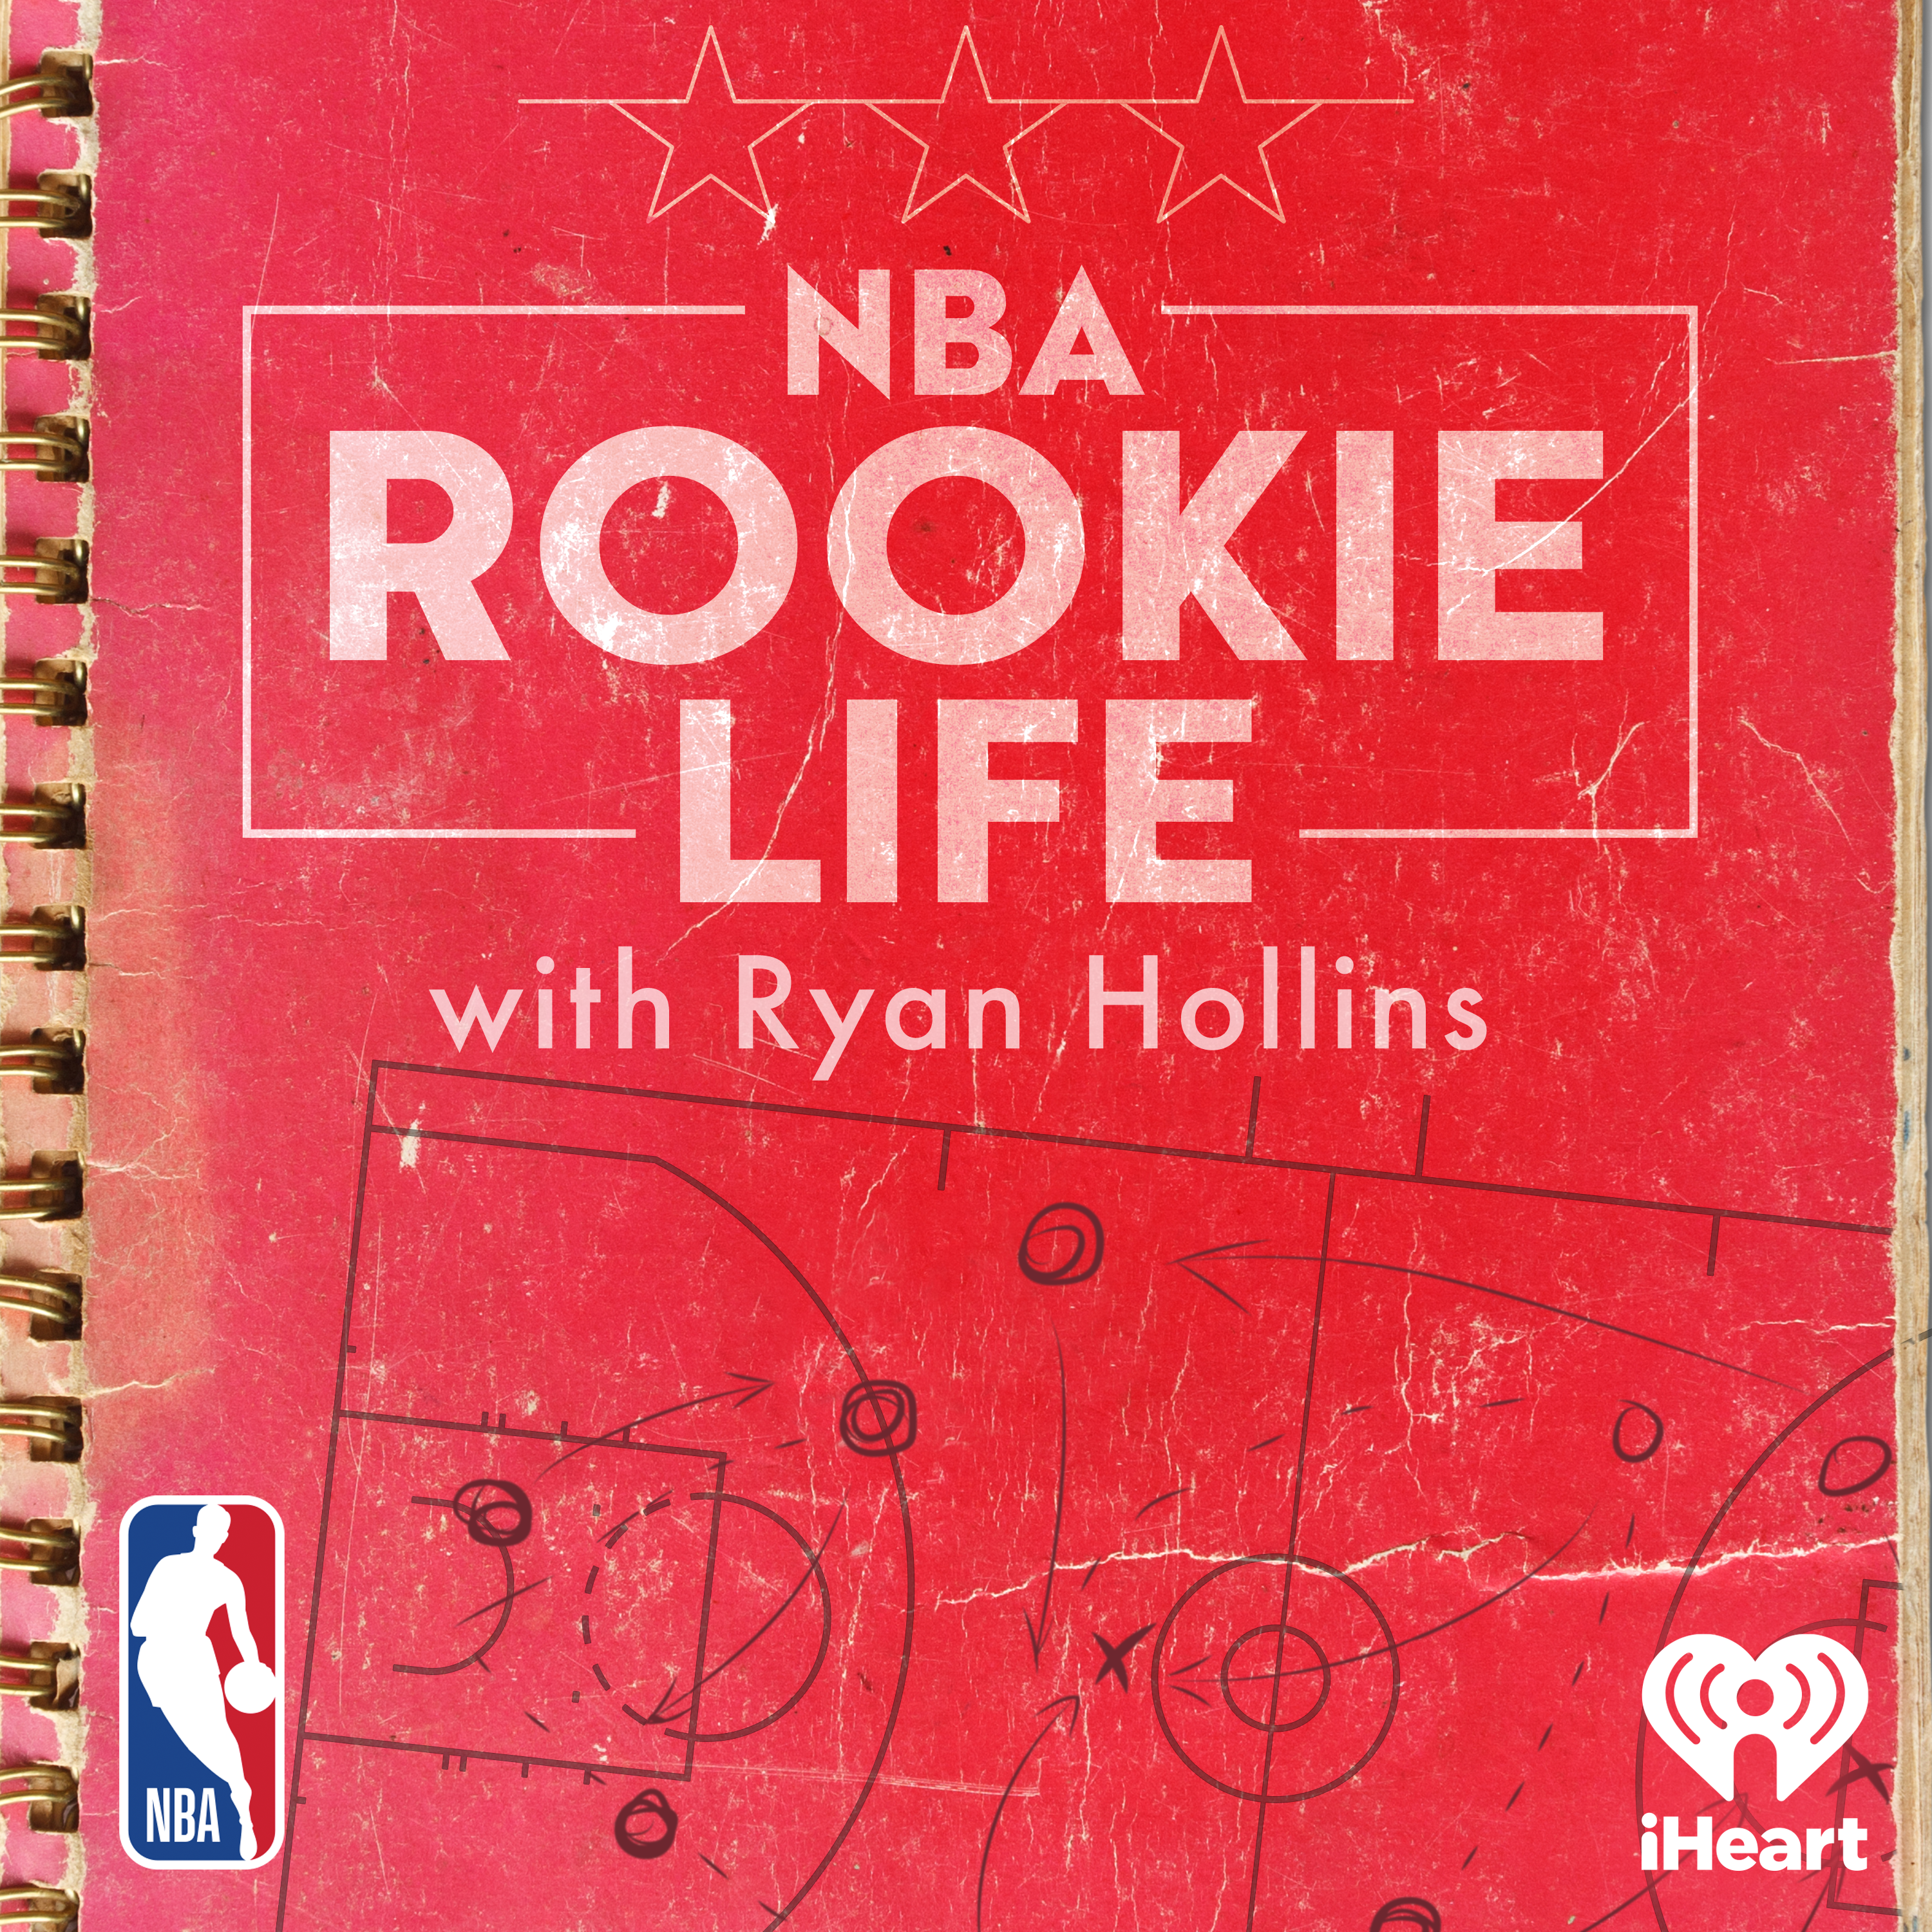 NBA Rookie Life - Walker Kessler on his Debut Double-Double, Getting Traded, and his "Welcome to the NBA" Moment